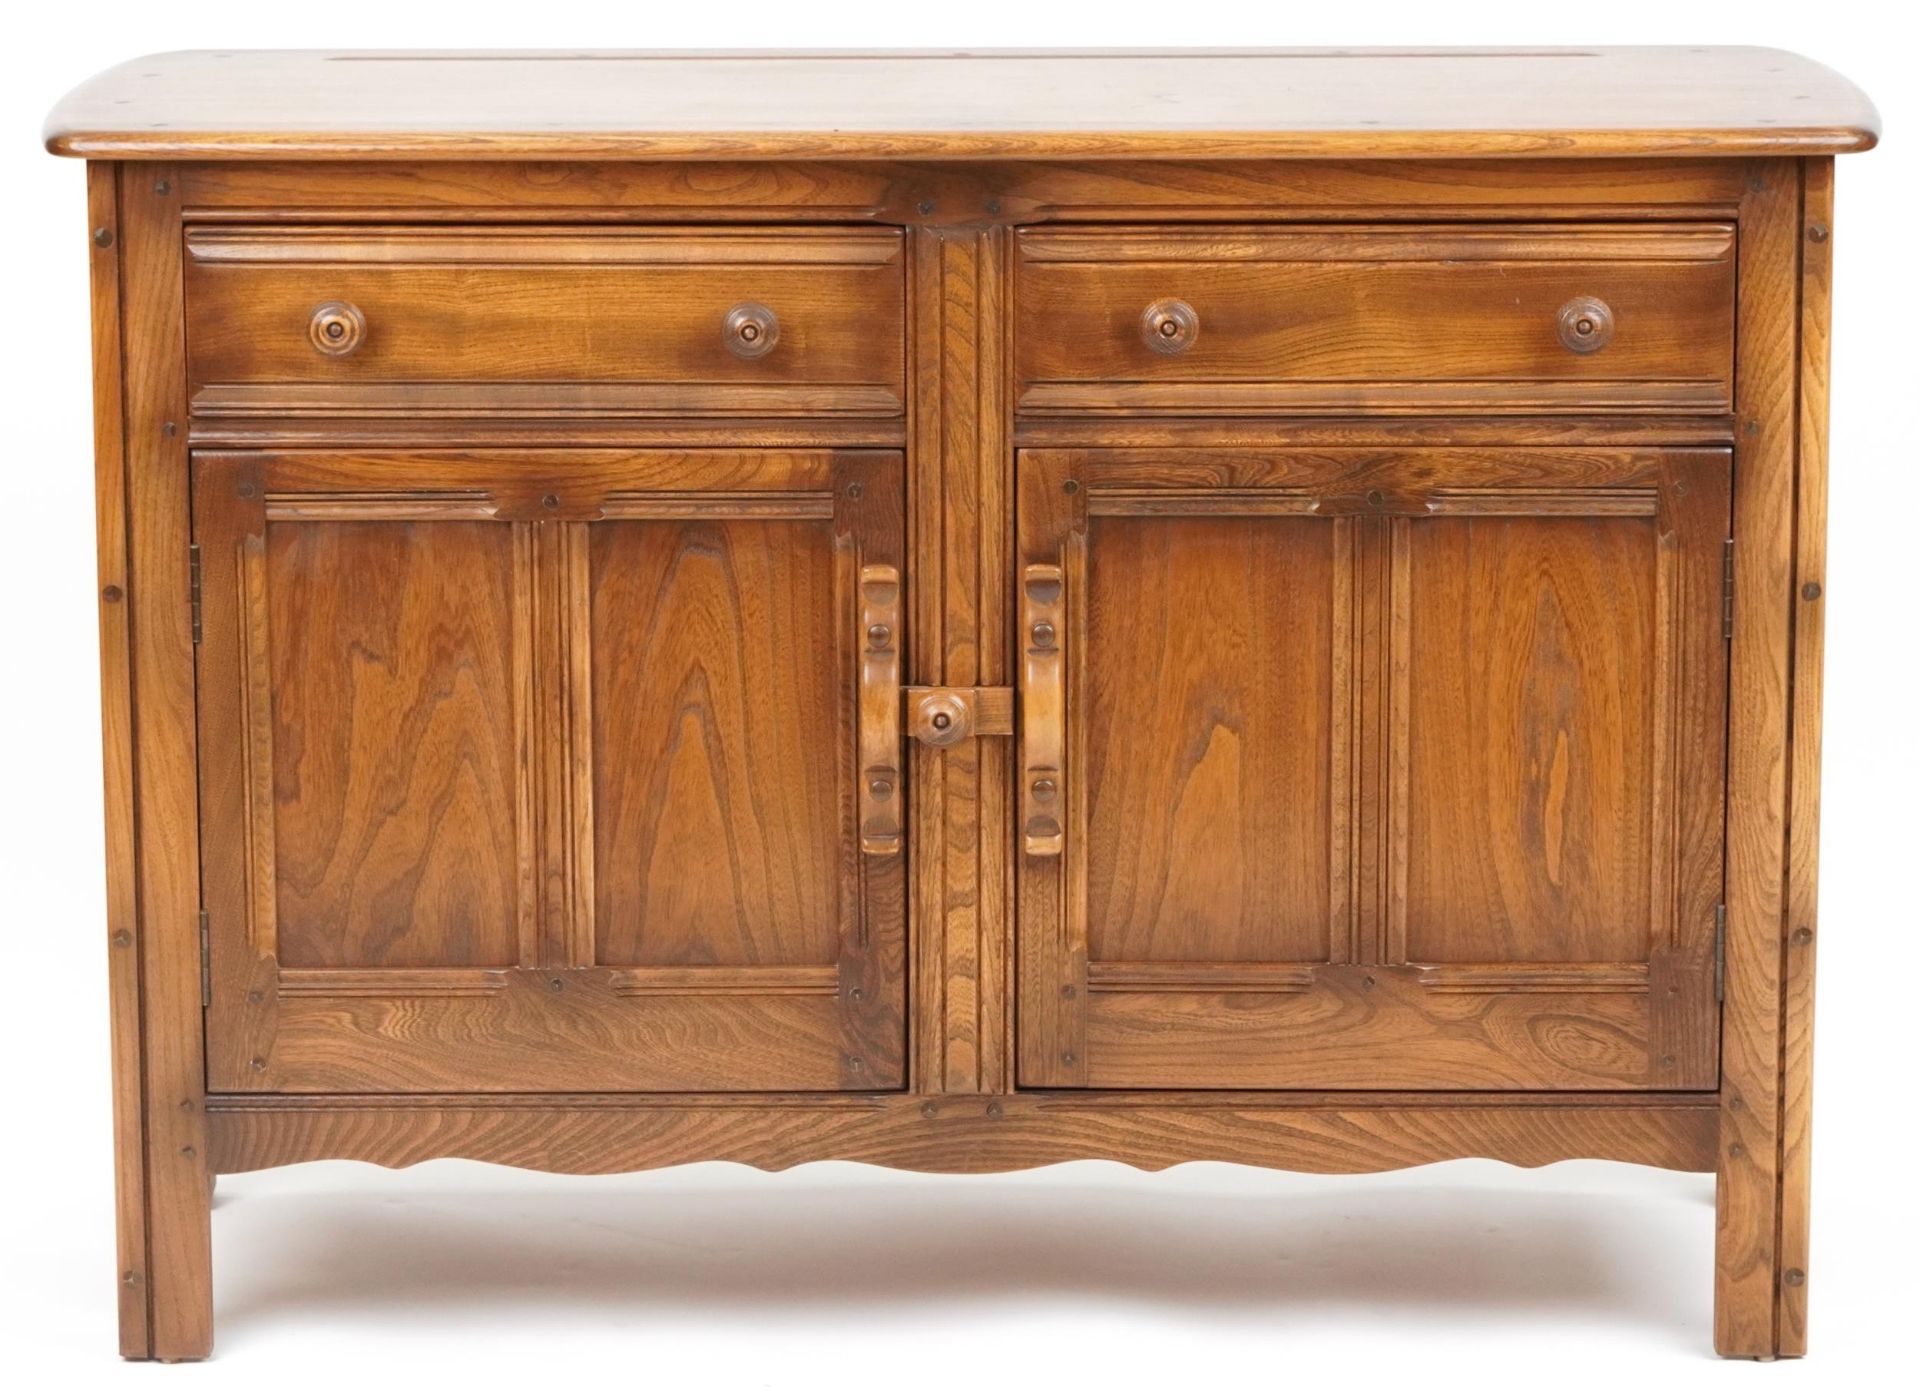 Ercol elm sideboard fitted with two drawers above a pair of cupboard doors, 85cm H x 122cm W x - Image 2 of 6